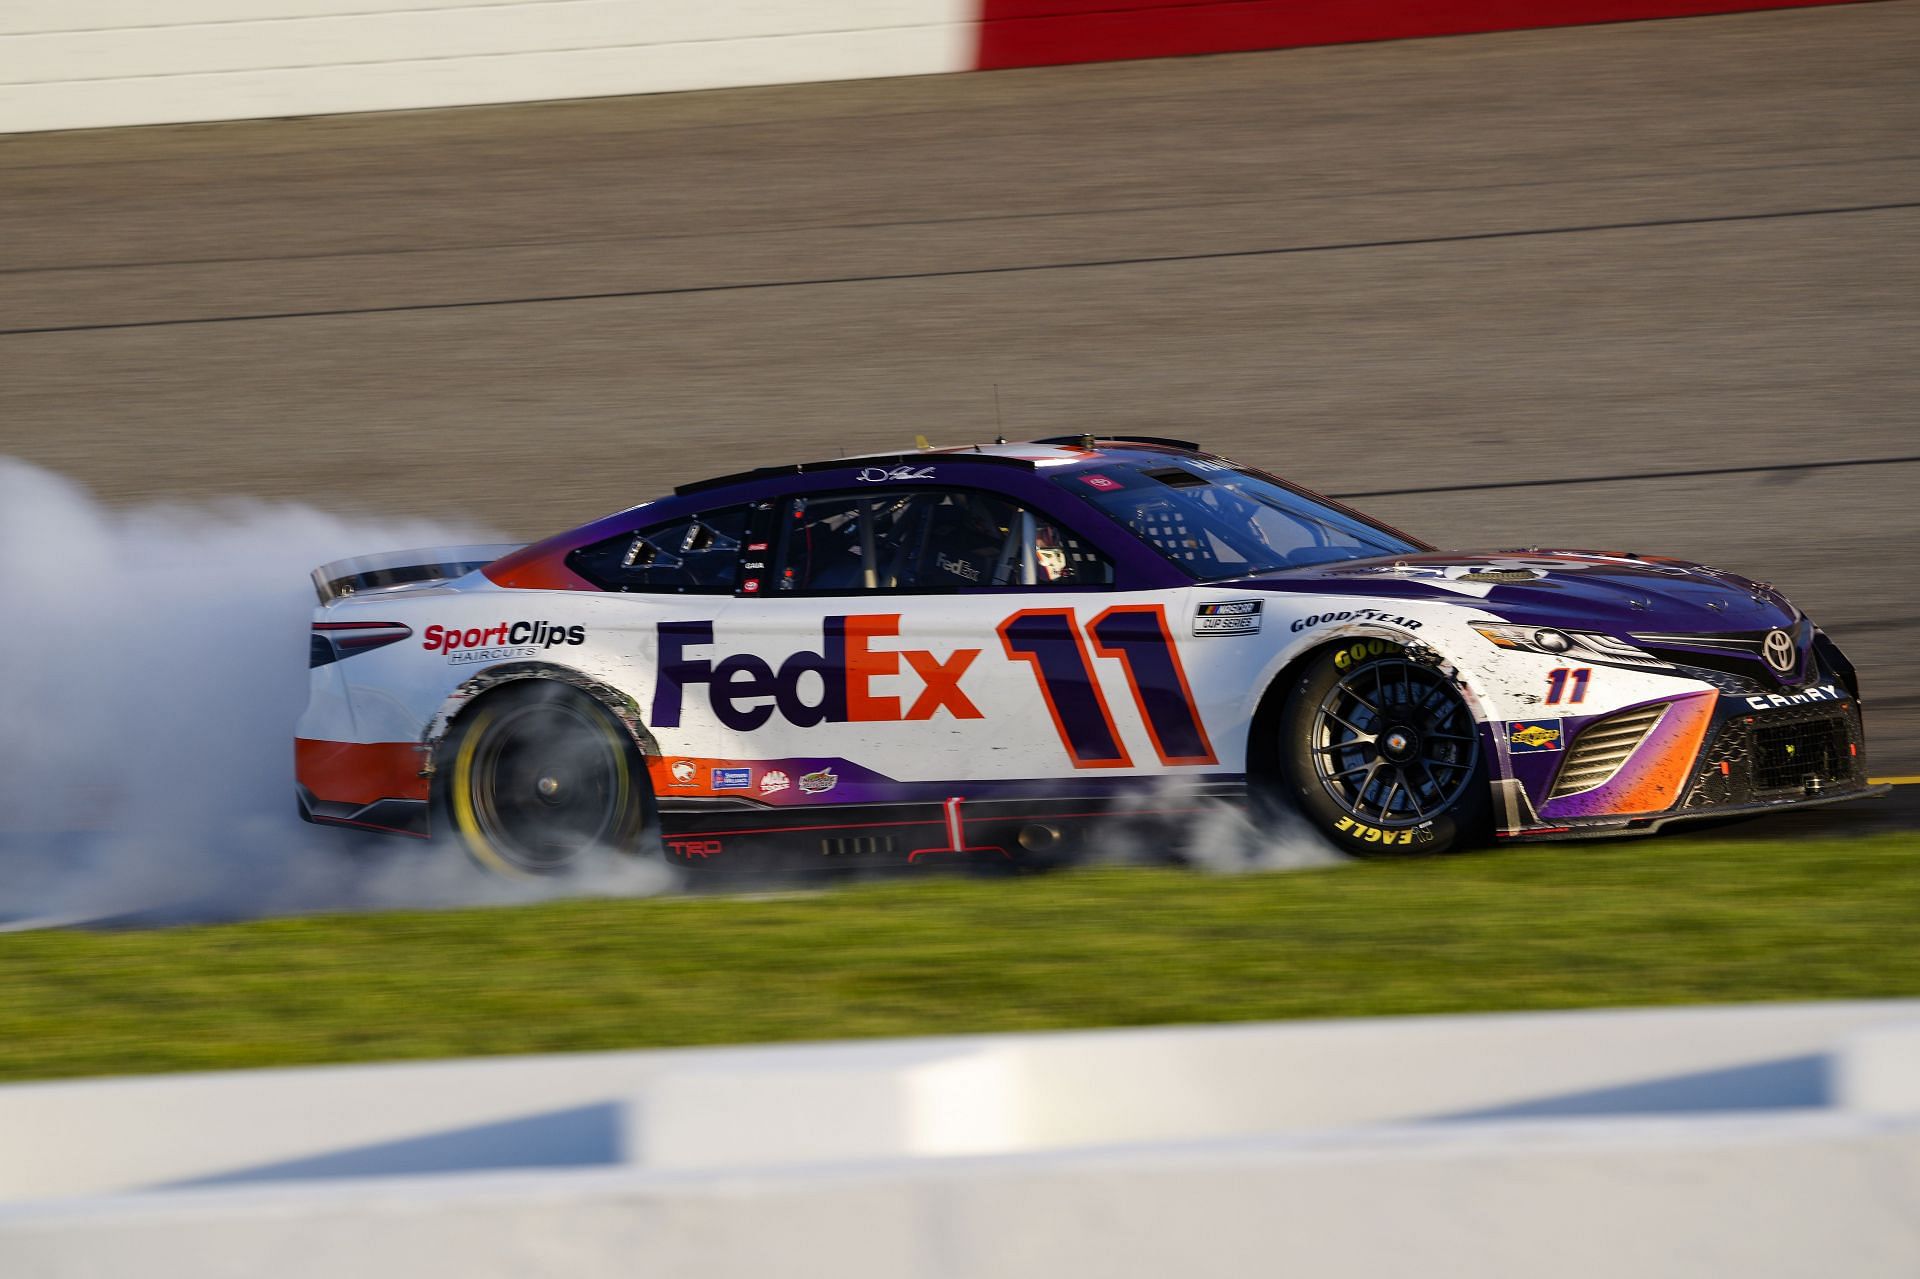 Denny Hamlin celebrates with a burnout after winning the NASCAR Cup Series Toyota Owners 400 at Richmond Raceway.